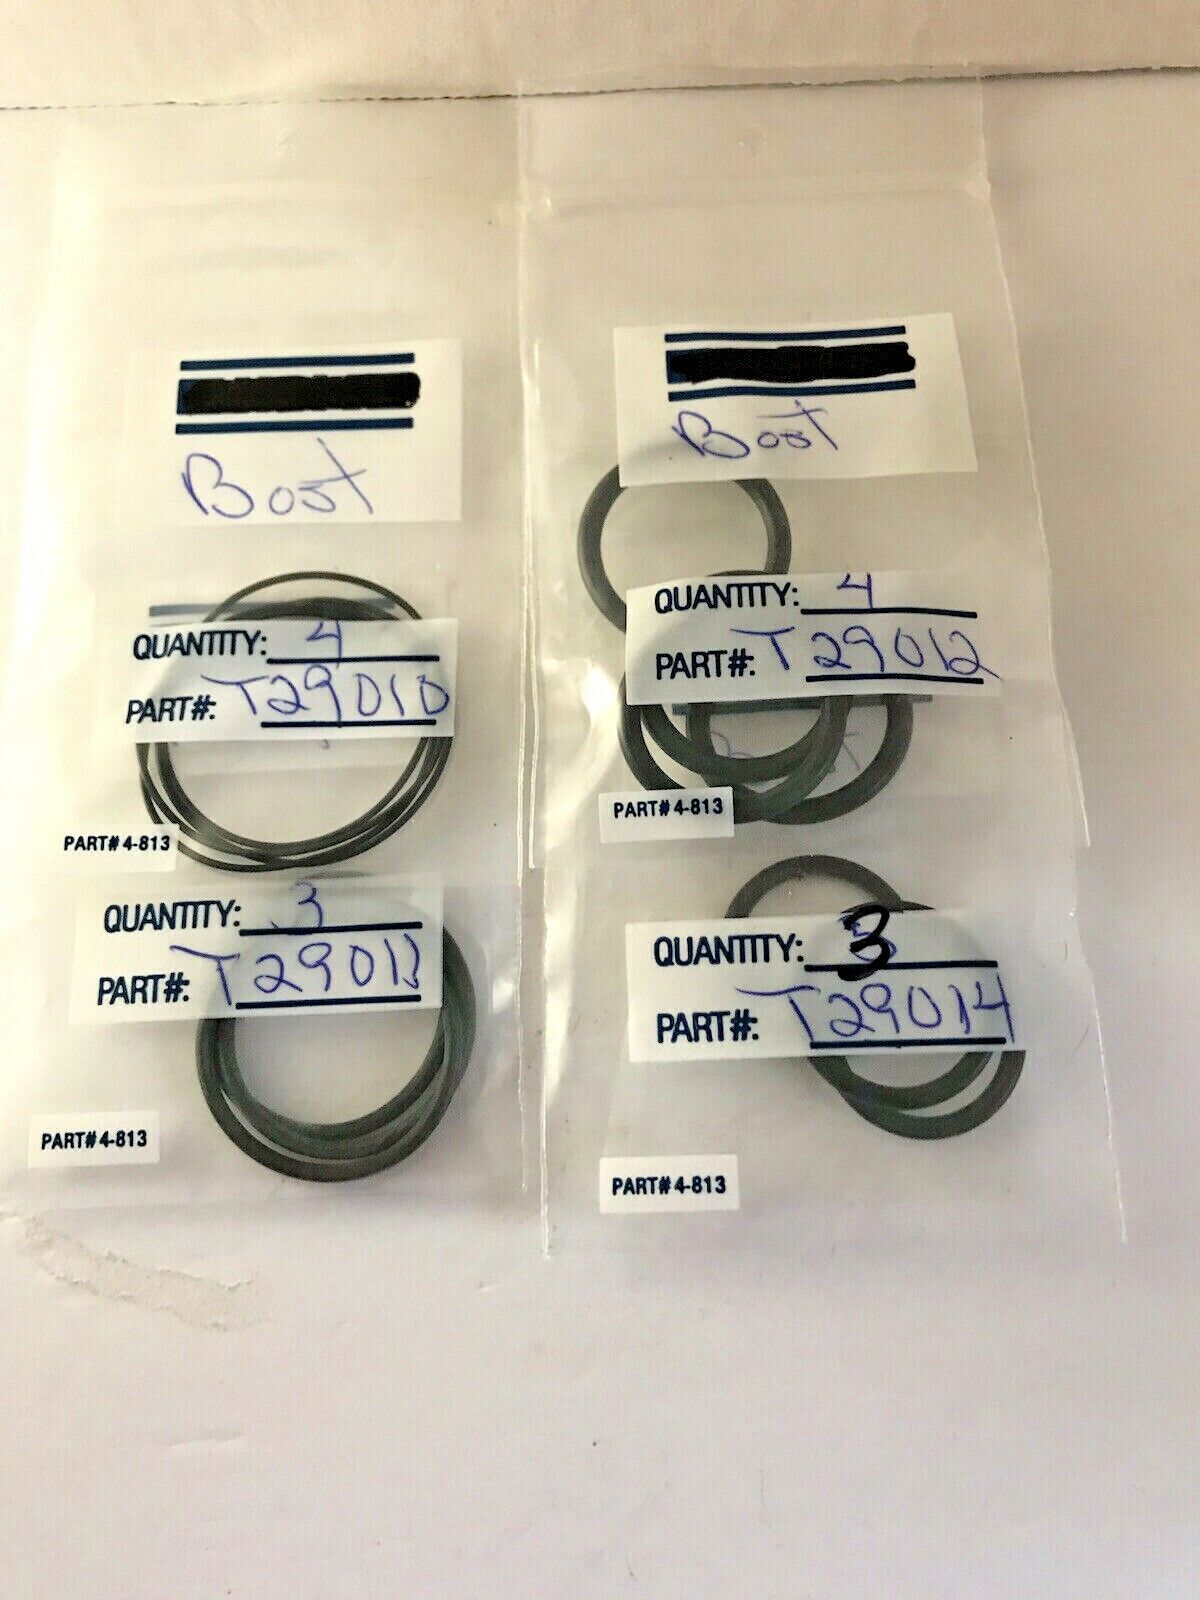 LOT OF 4 PART NUMBERED BOSTITCH O-RINGS  FOR PNEUMATIC FASTENING TOOLS Bostitch T29014 / T29012 / T29010 / T29011